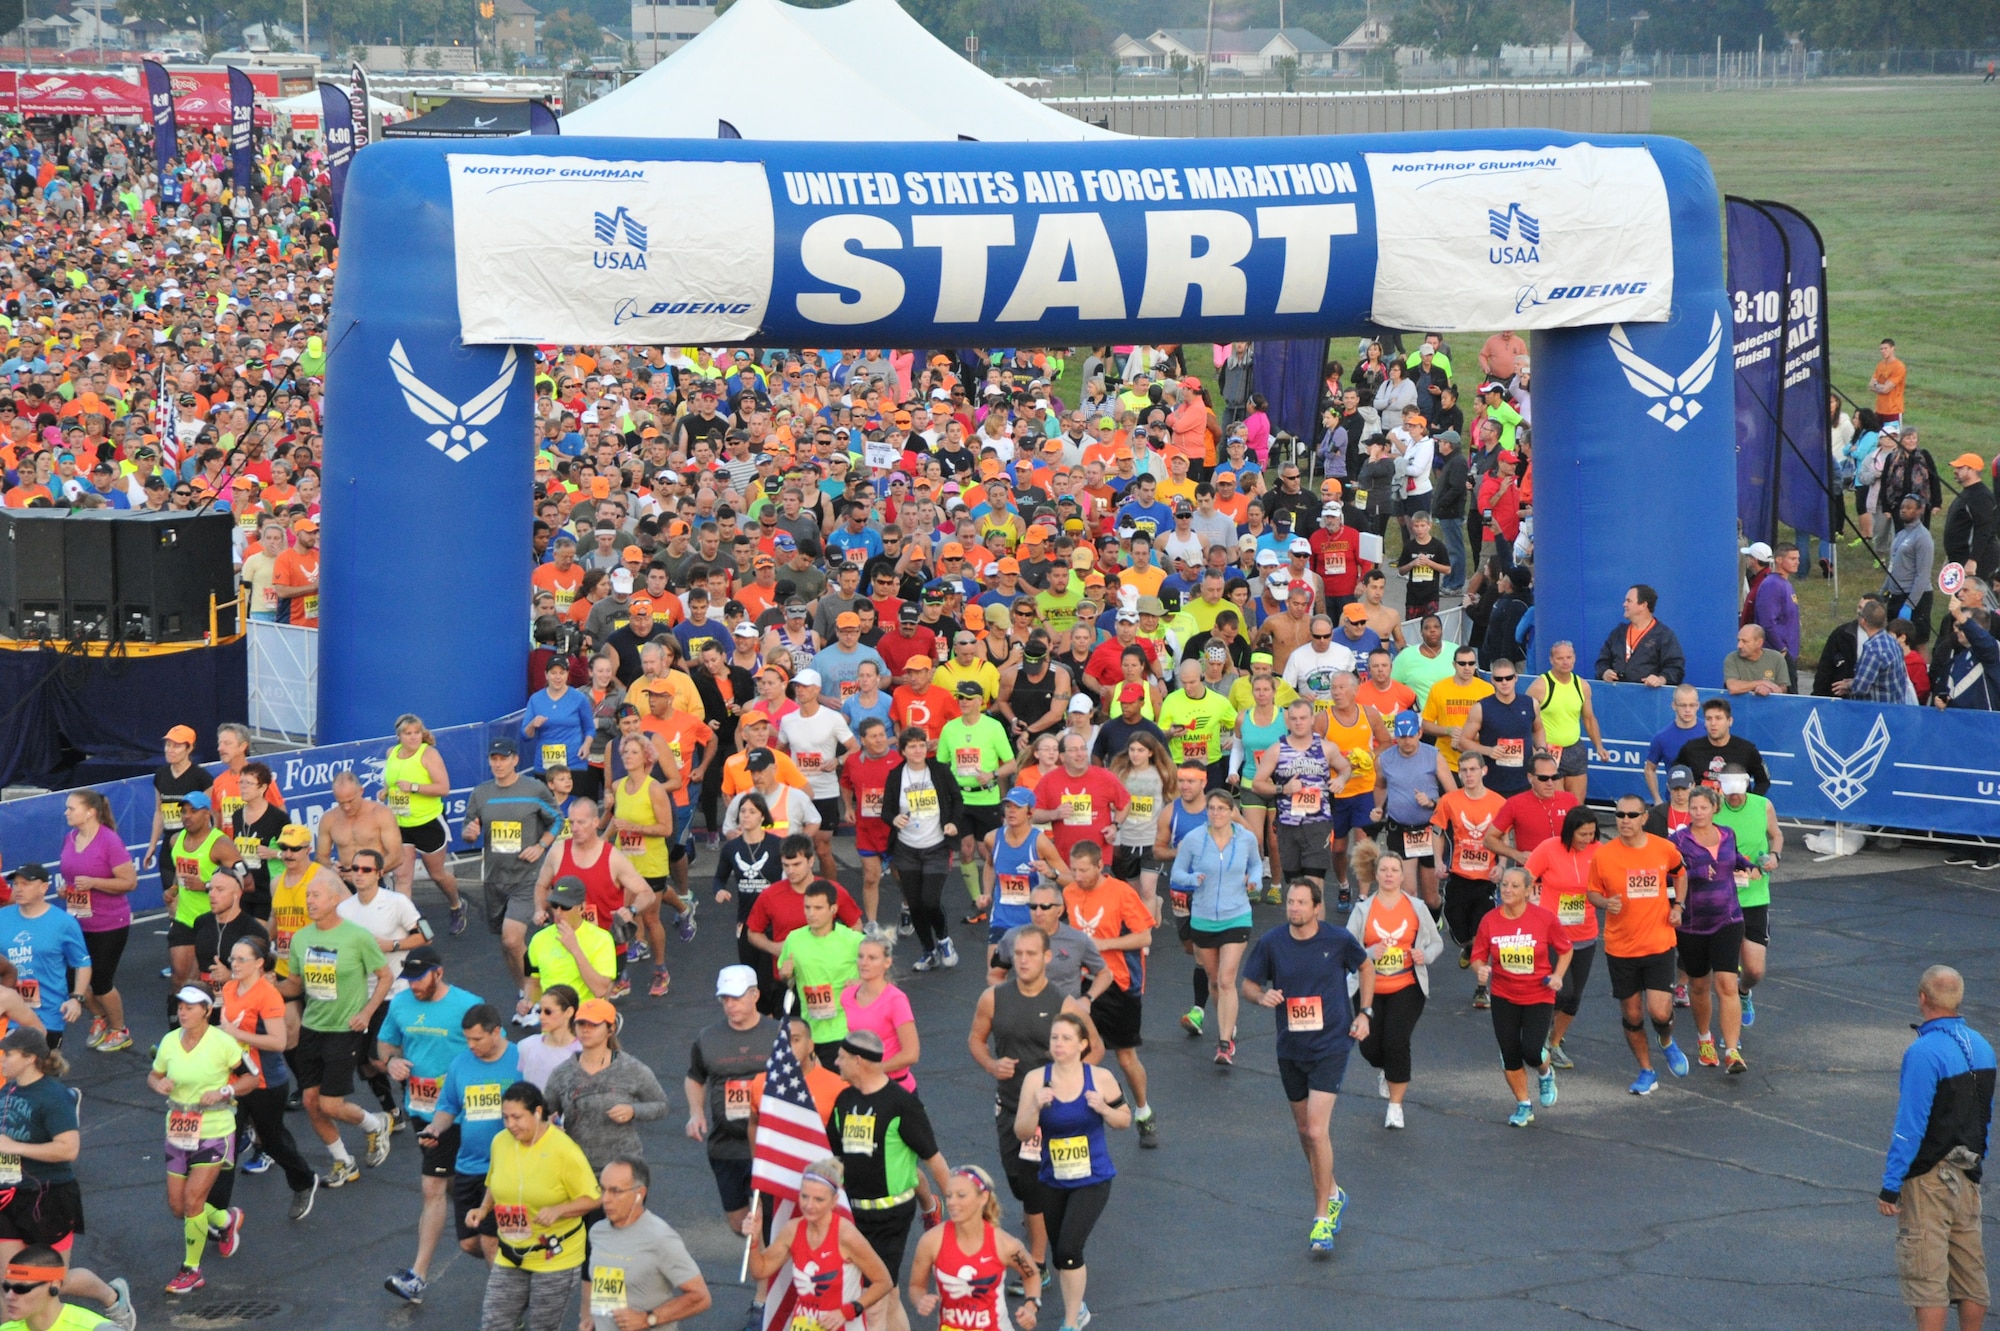 Runners take off from the starting line of the 2014 U.S, Air Force Marathon, Wright-Patterson Air Force Base, Ohio, Sept. 20. The race set an attendance record again this year with approximately 15,000 runners. (U.S. Air Force photo by Mike Libecap)